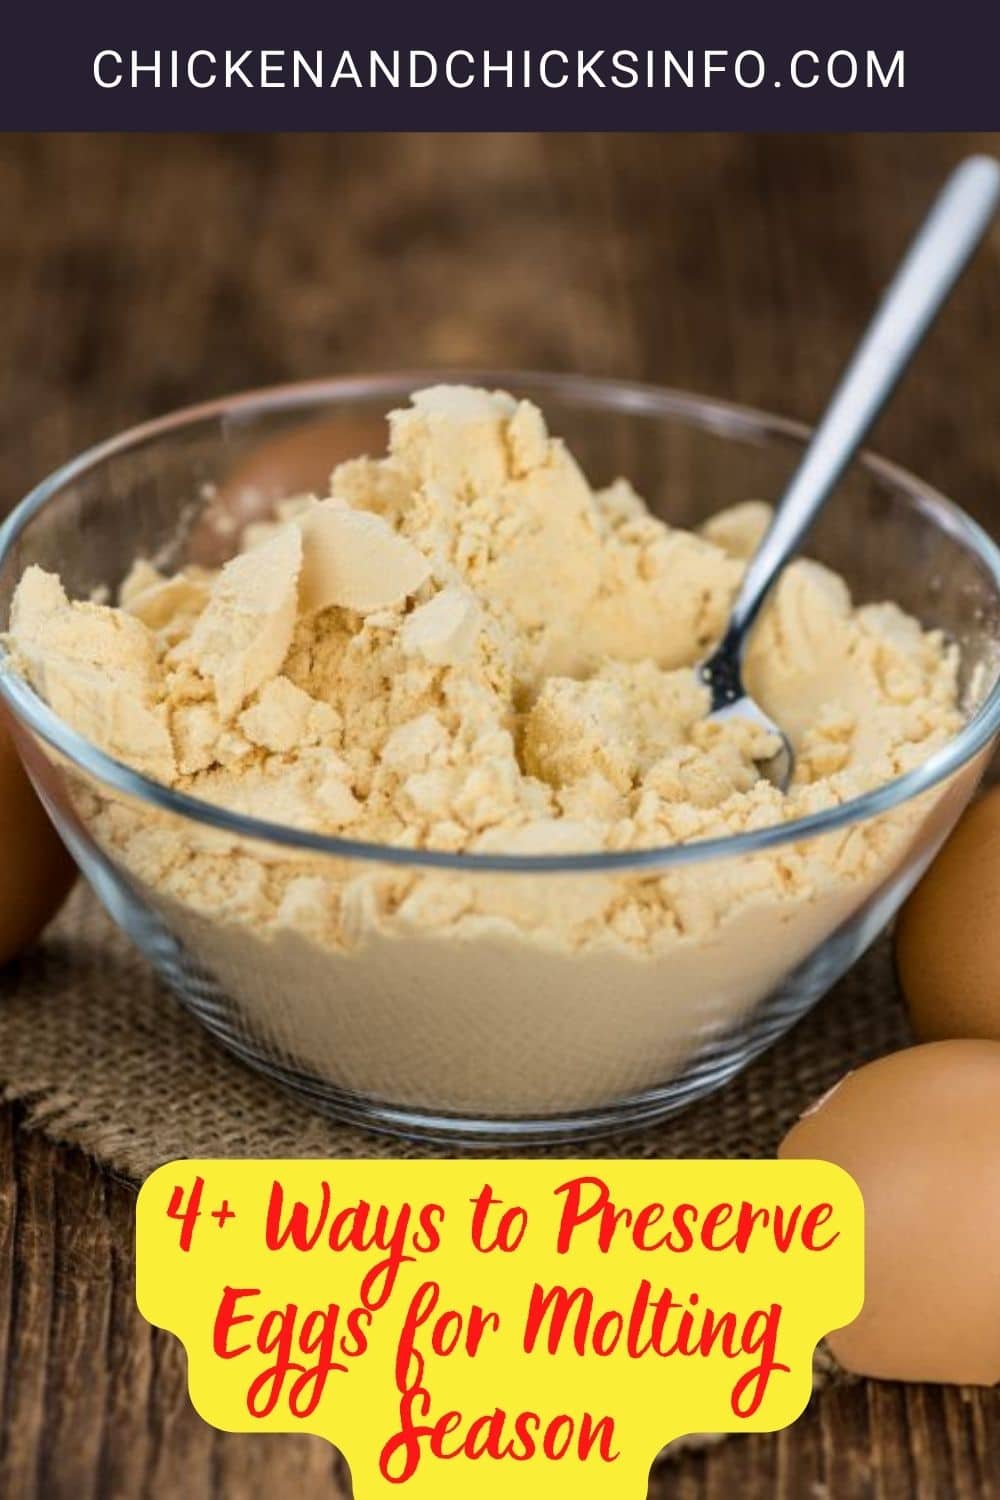 4+ Ways to Preserve Eggs for Molting Season Pinterest image.